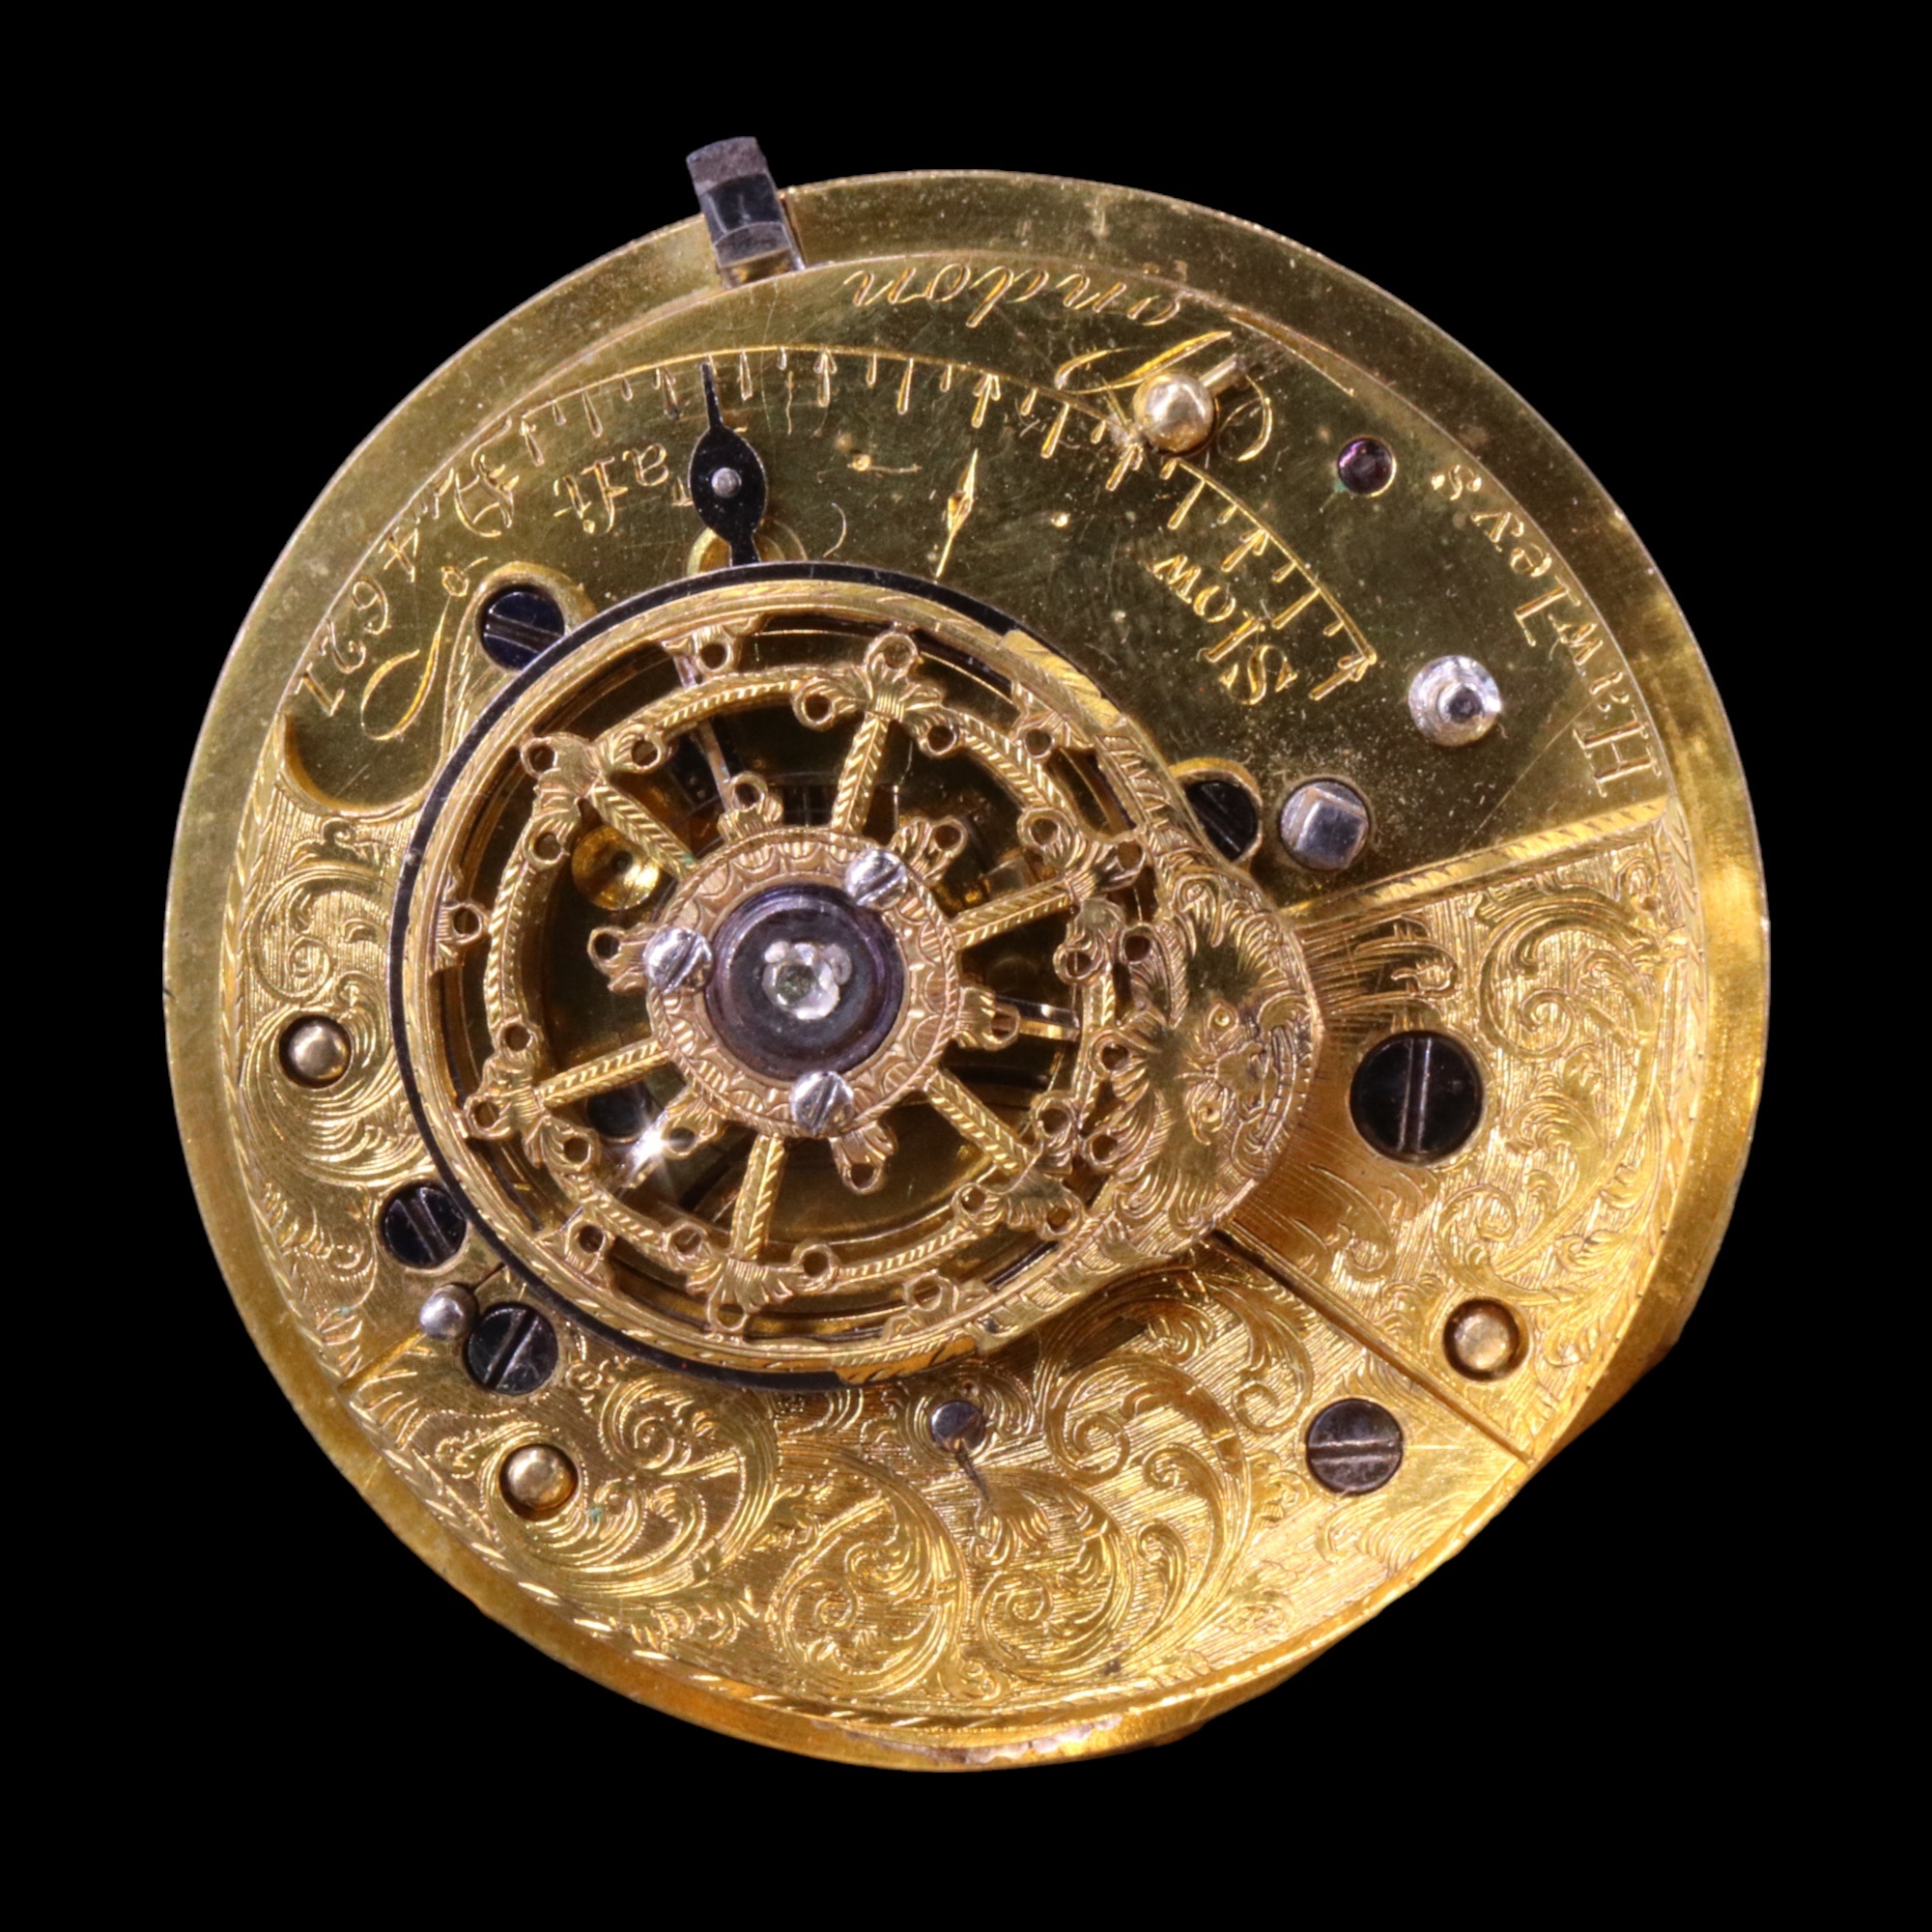 A Regency 18 ct gold verge pocket watch by Thomas Hawley & Co of London, its movement signed - Image 3 of 5